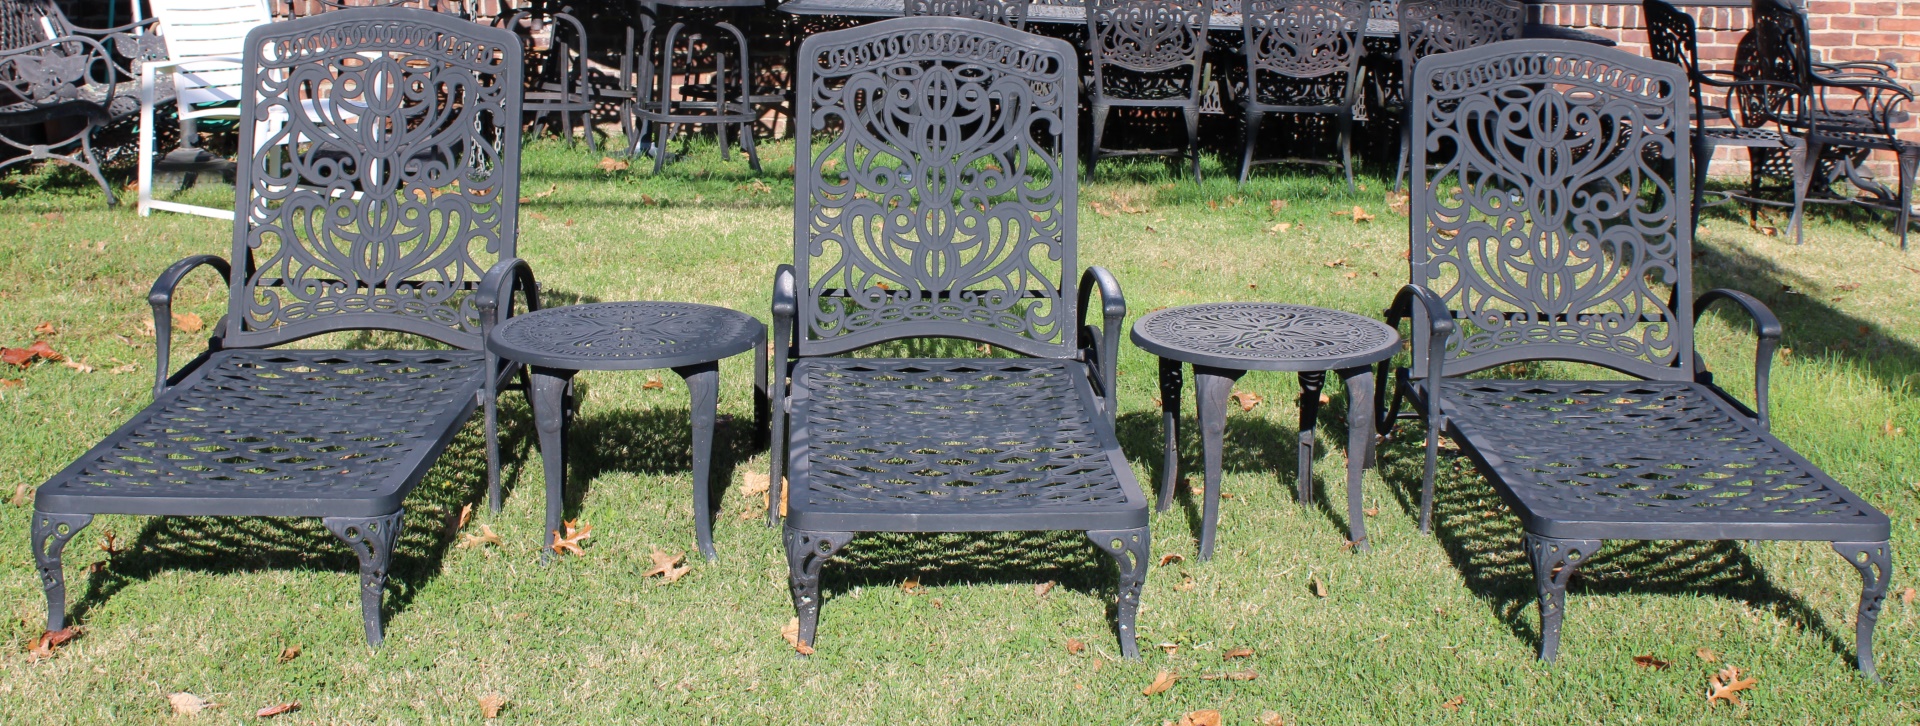 3 VINTAGE PATINATED IRON CHAISES 3b90ad